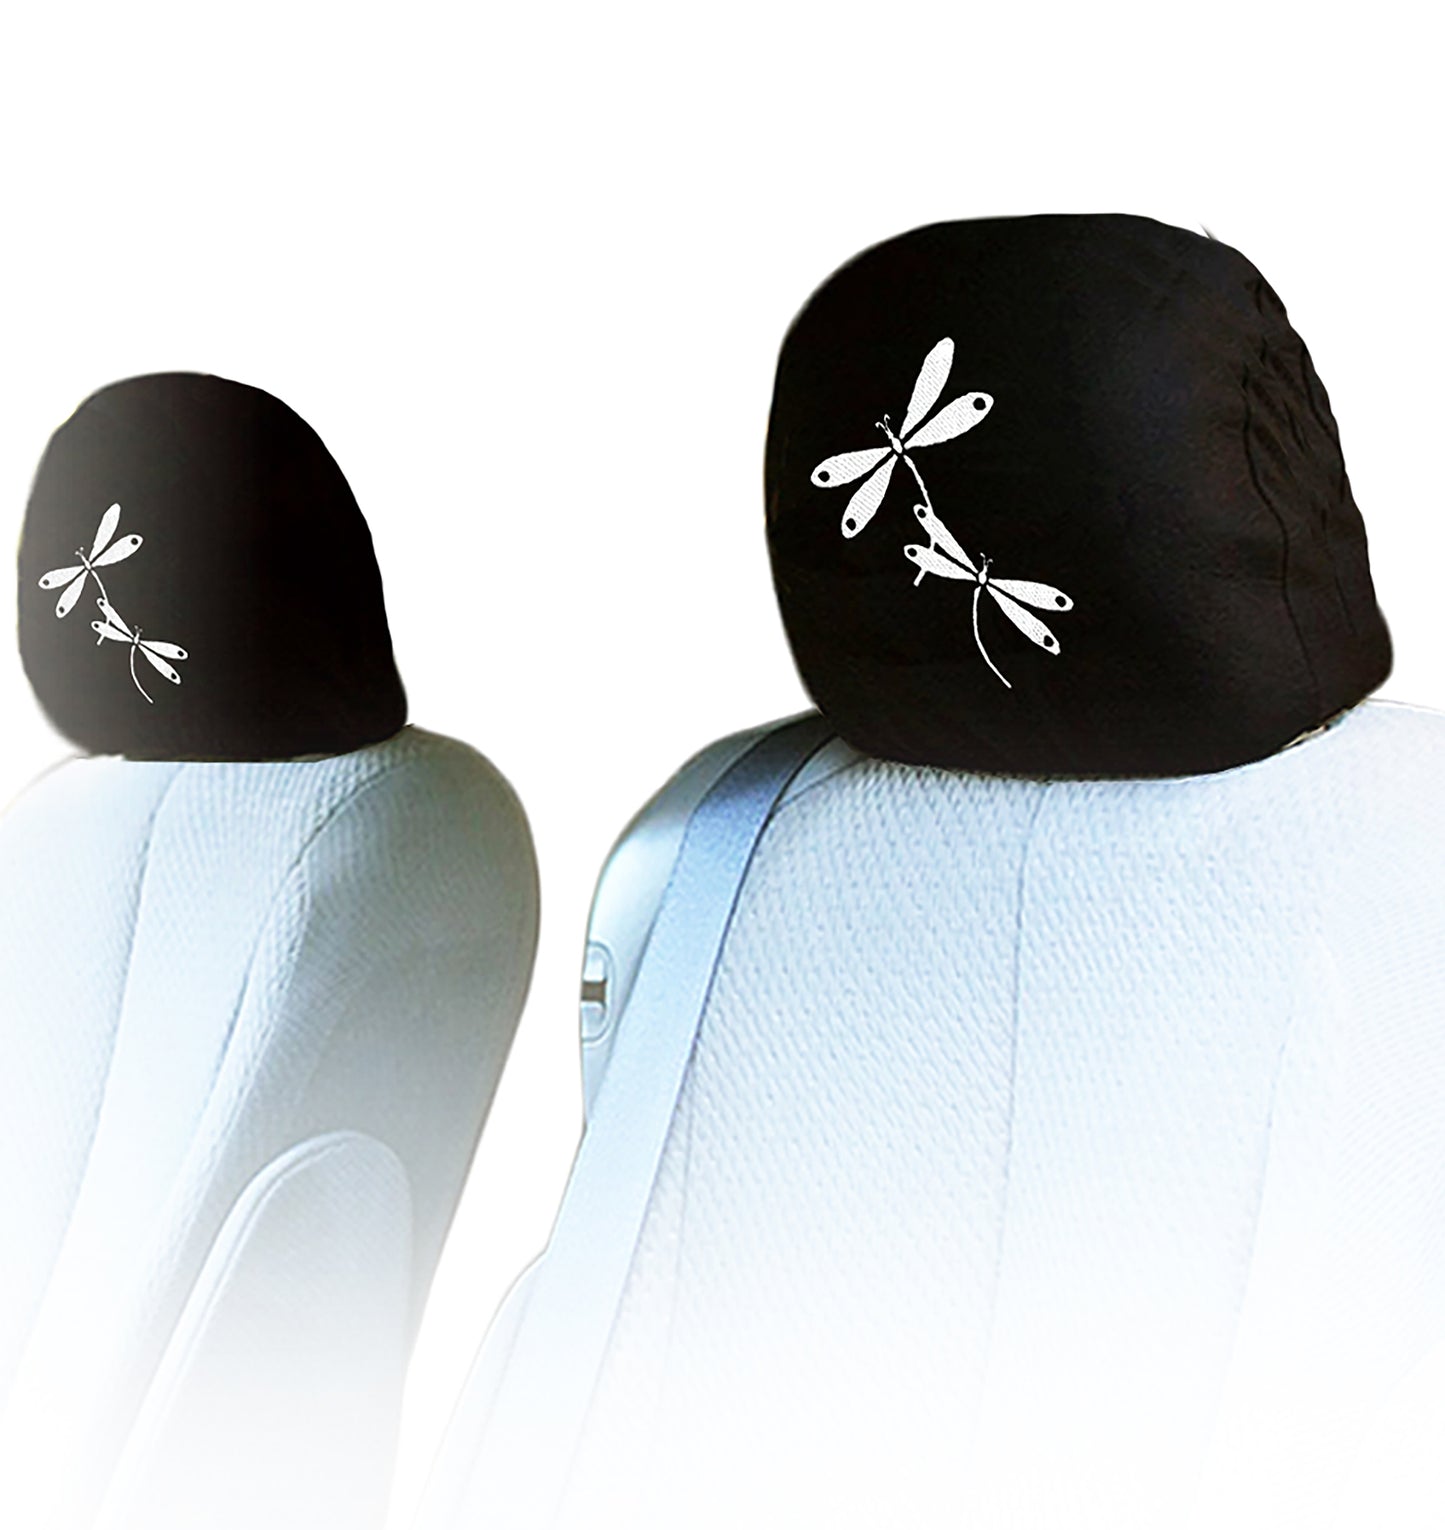 Embroidery Dragonfly Logo Design Auto Truck SUV Car Seat Headrest Cover Accessory 1 Pair - Yupbizauto